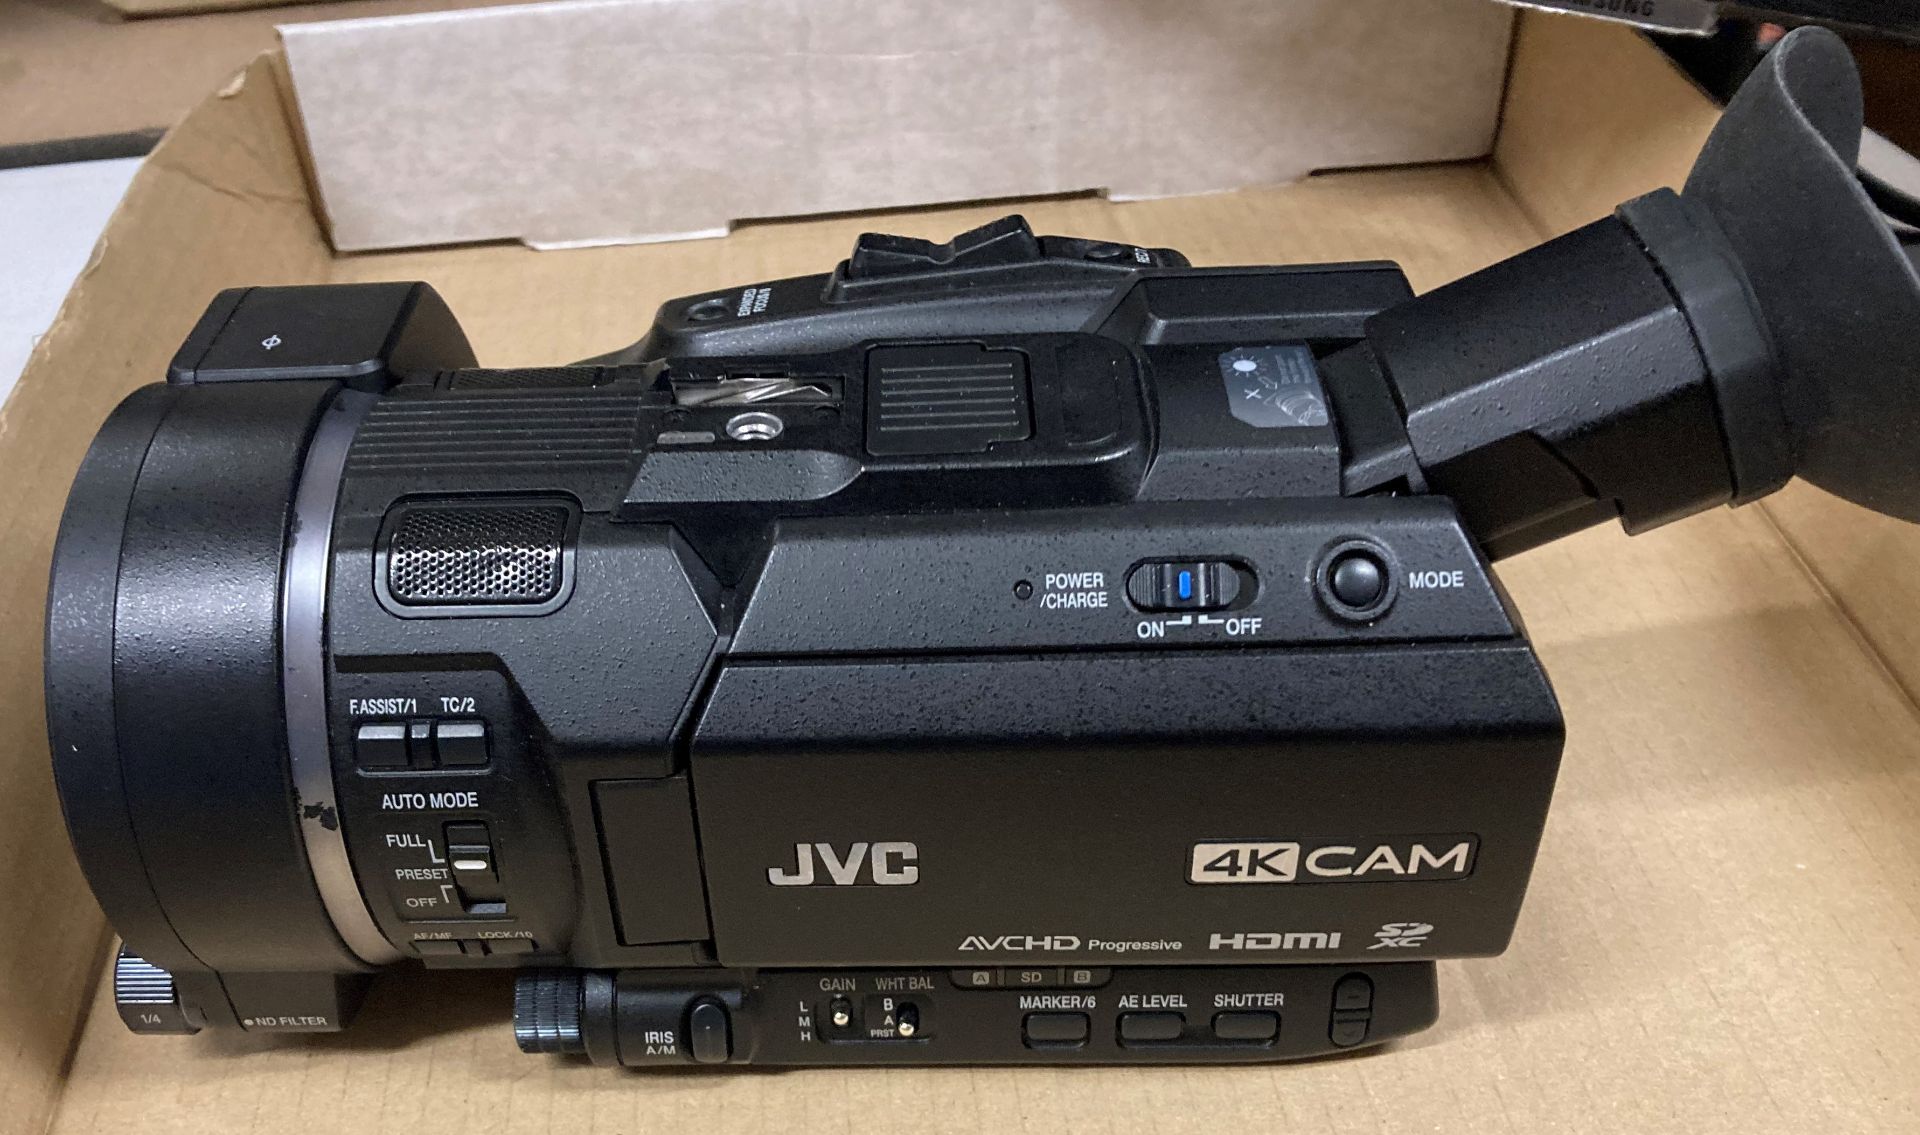 2 x JVC AVCHD 4K hand-held video cameras complete with Lumix lenses, spare batteries, microphones, - Image 2 of 2